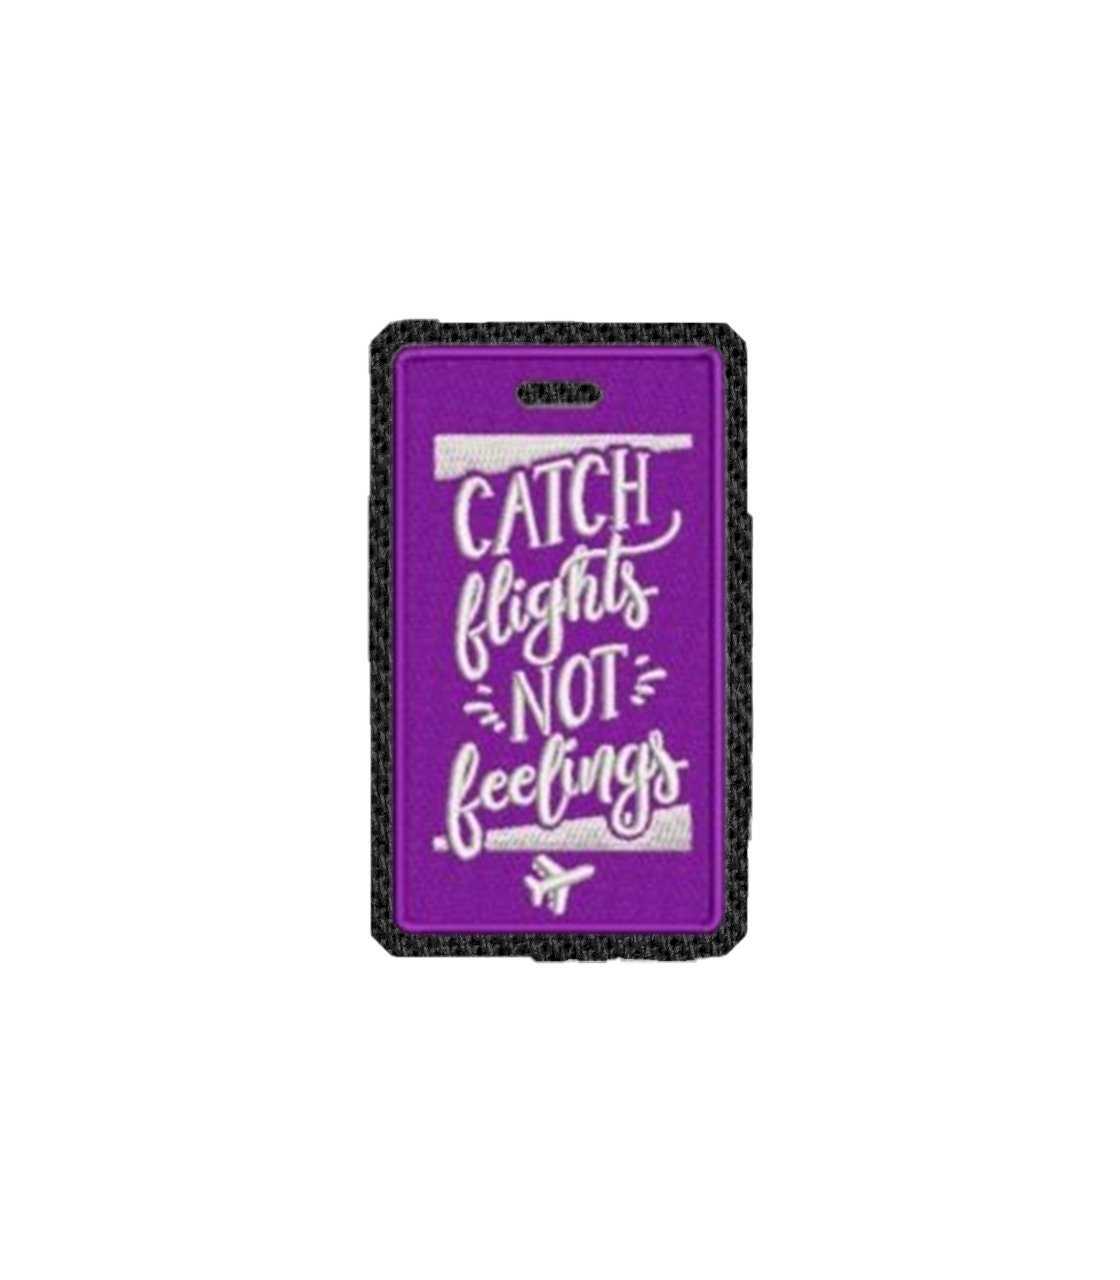 Catch Flights Not Feelings Iron on Patch /Sew on embroidered patch Travel & Season Embroidery Women Applique Merit Badge for Clothing Jacket